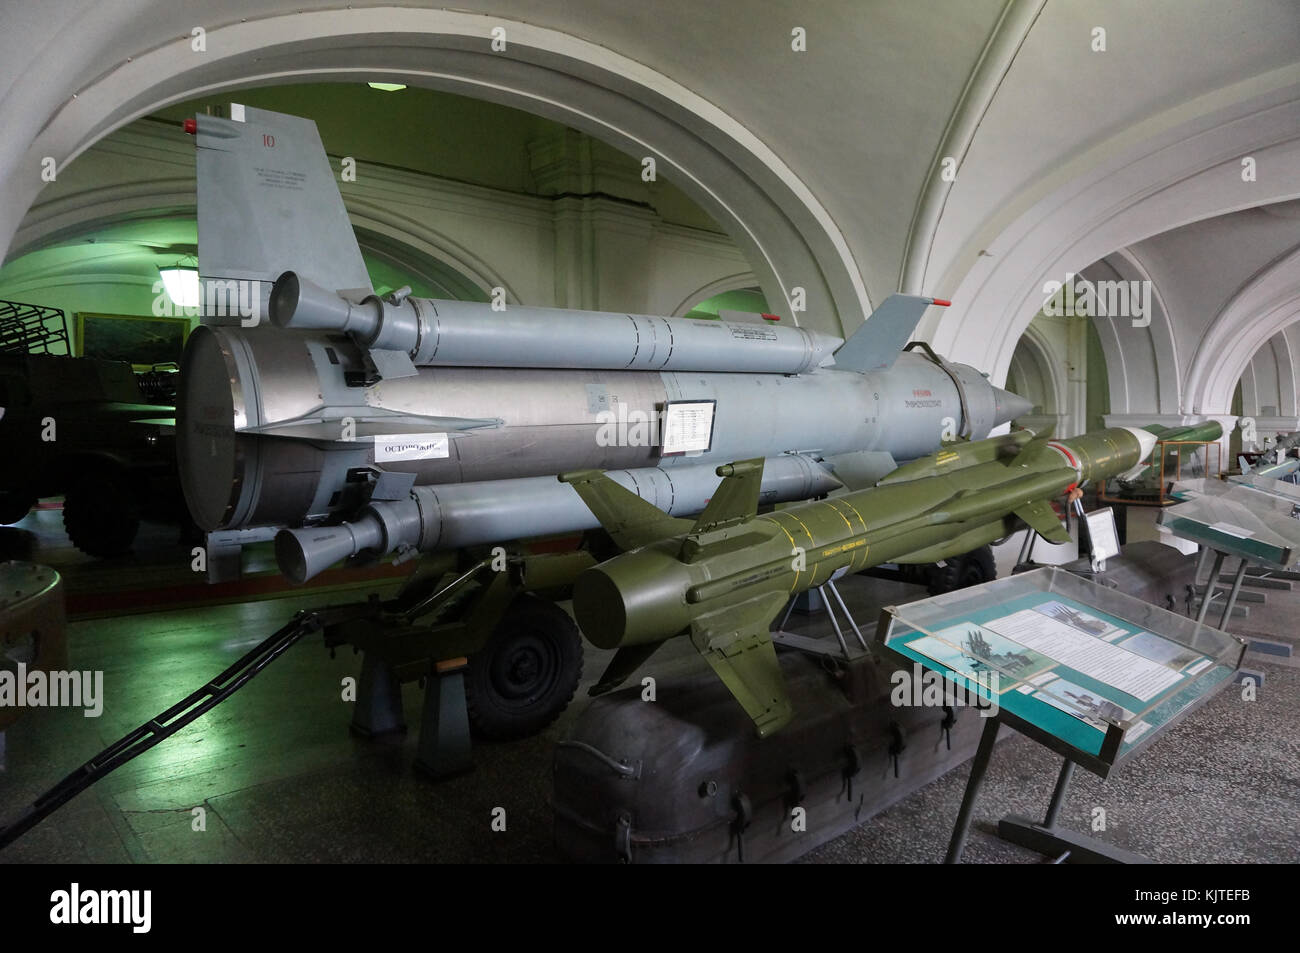 Saint Petersburg, Russia - 23.07.2017: Missiles on display at the Artillery Museum Stock Photo